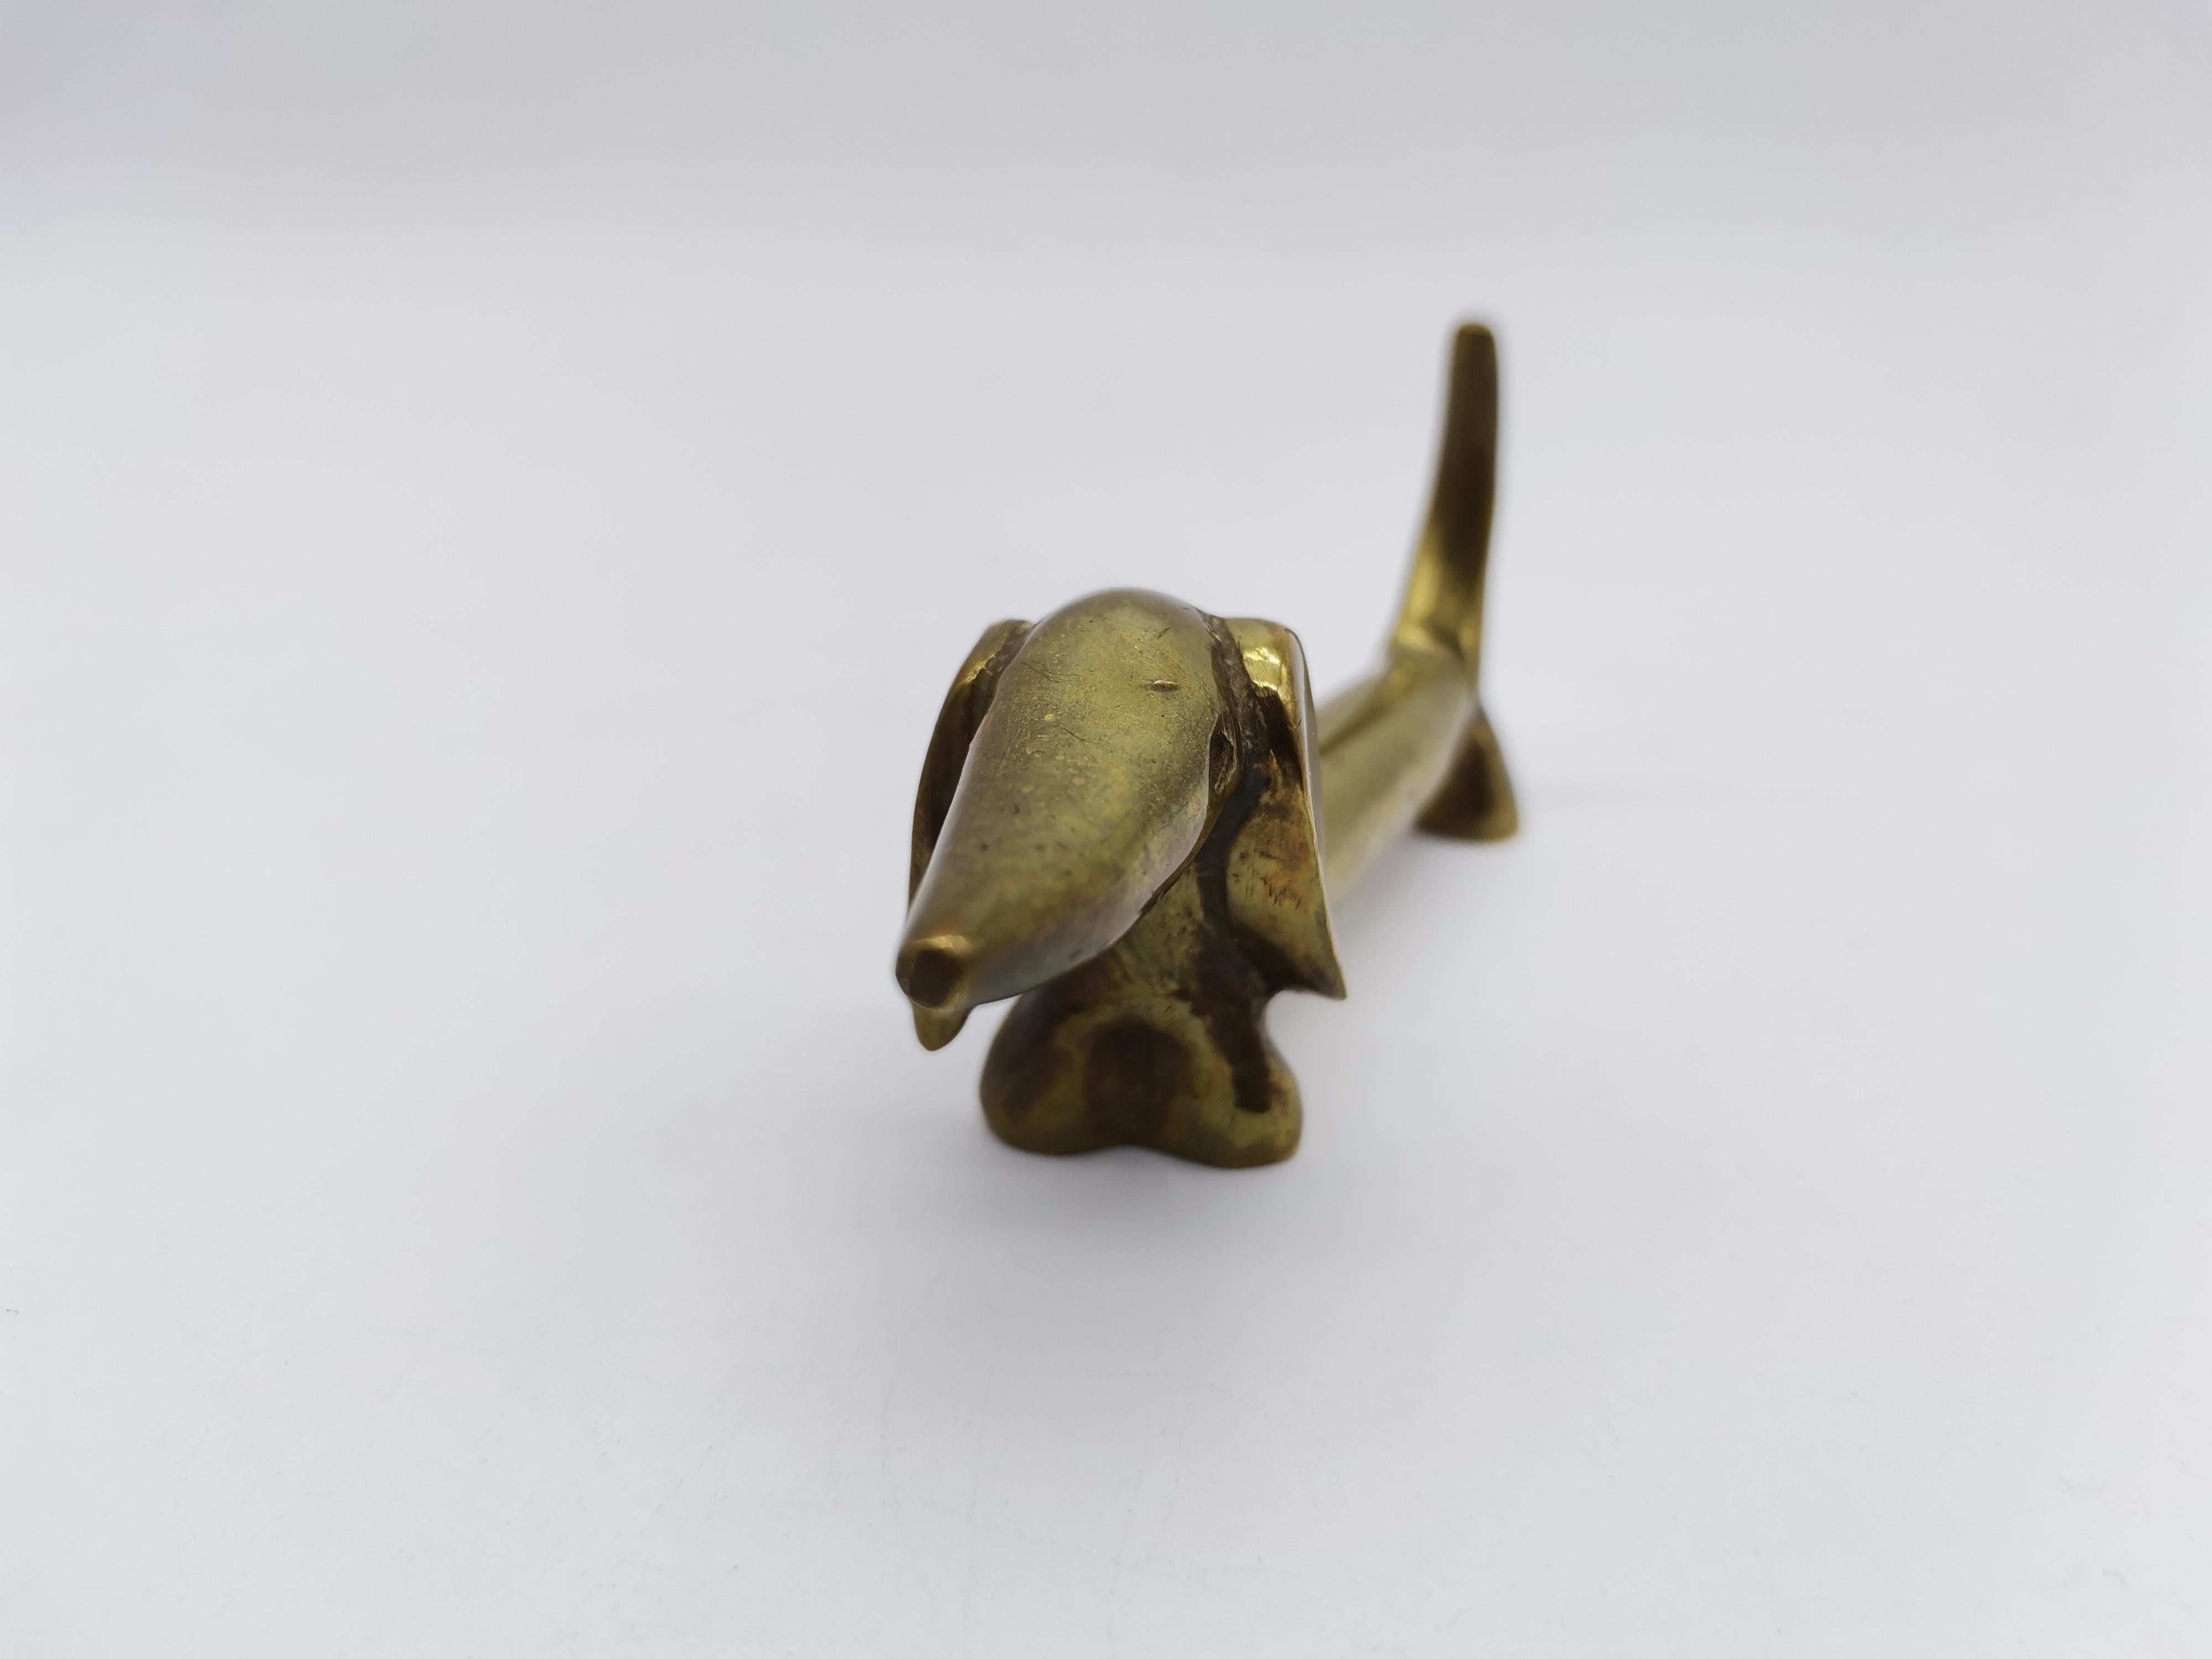 A small dog figurine by Walter Bosse made of brass.